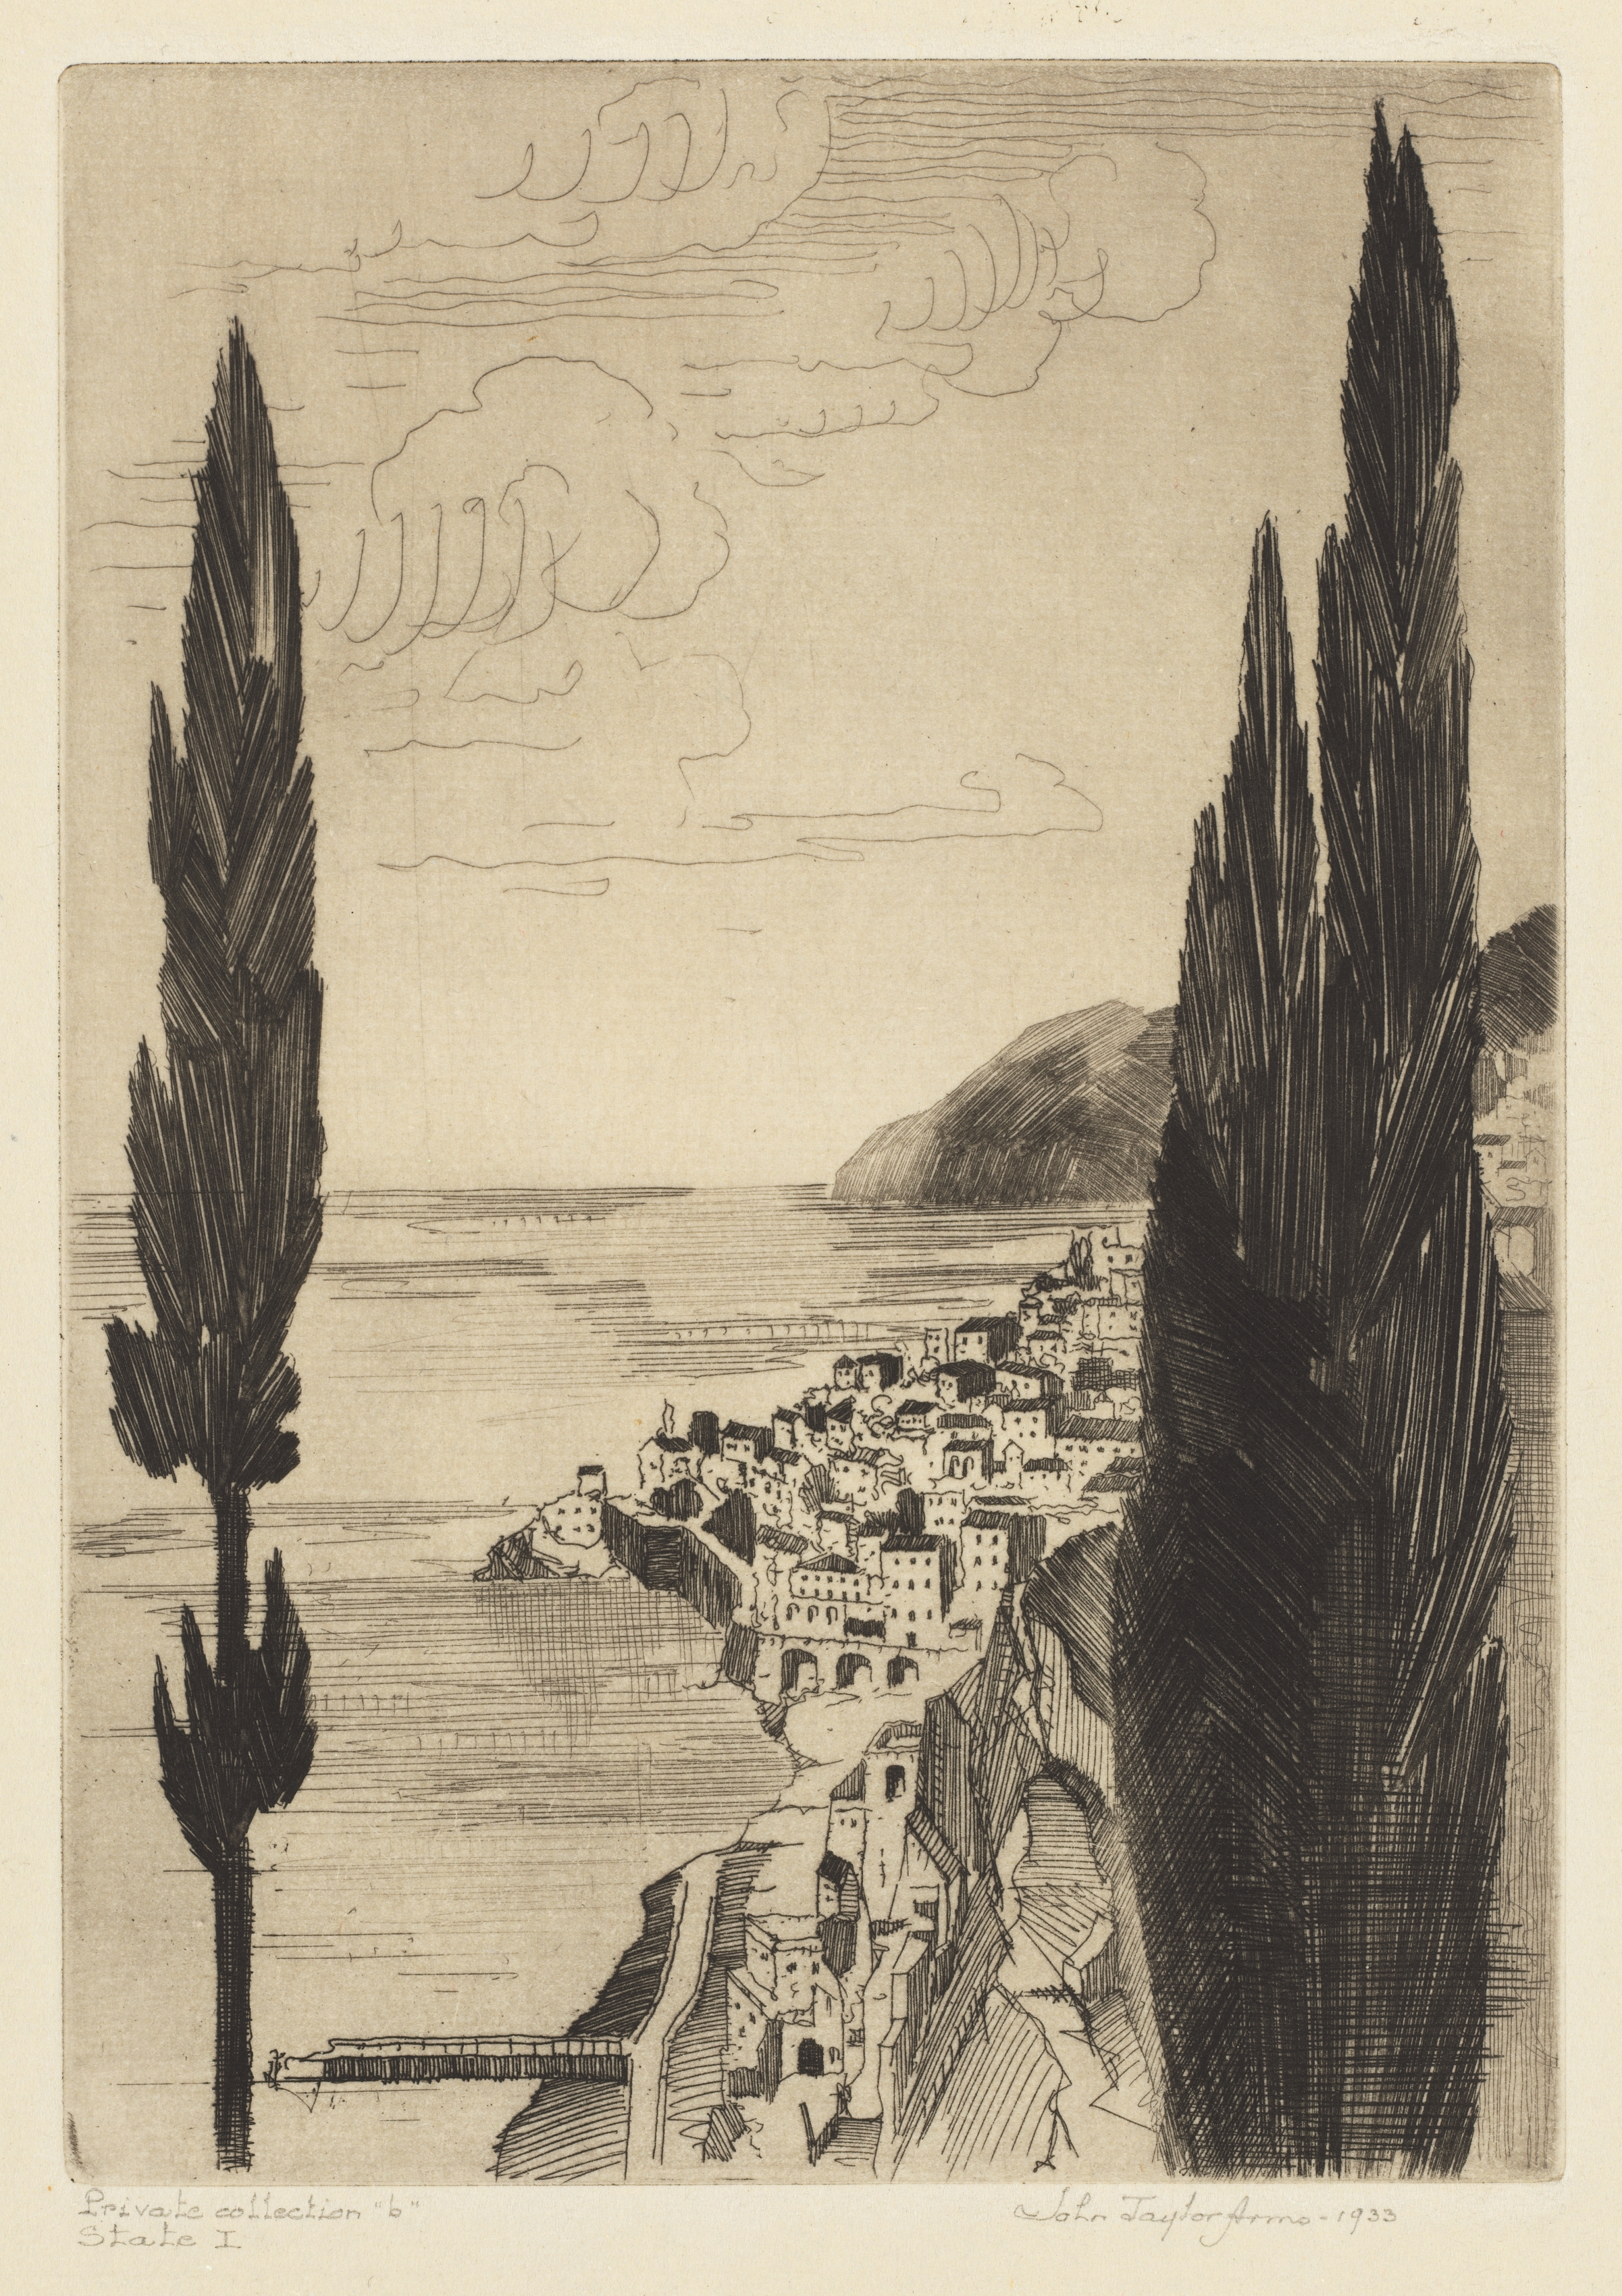 Demonstration Series Nos. 33 and 35: Amalfi (Sketch)